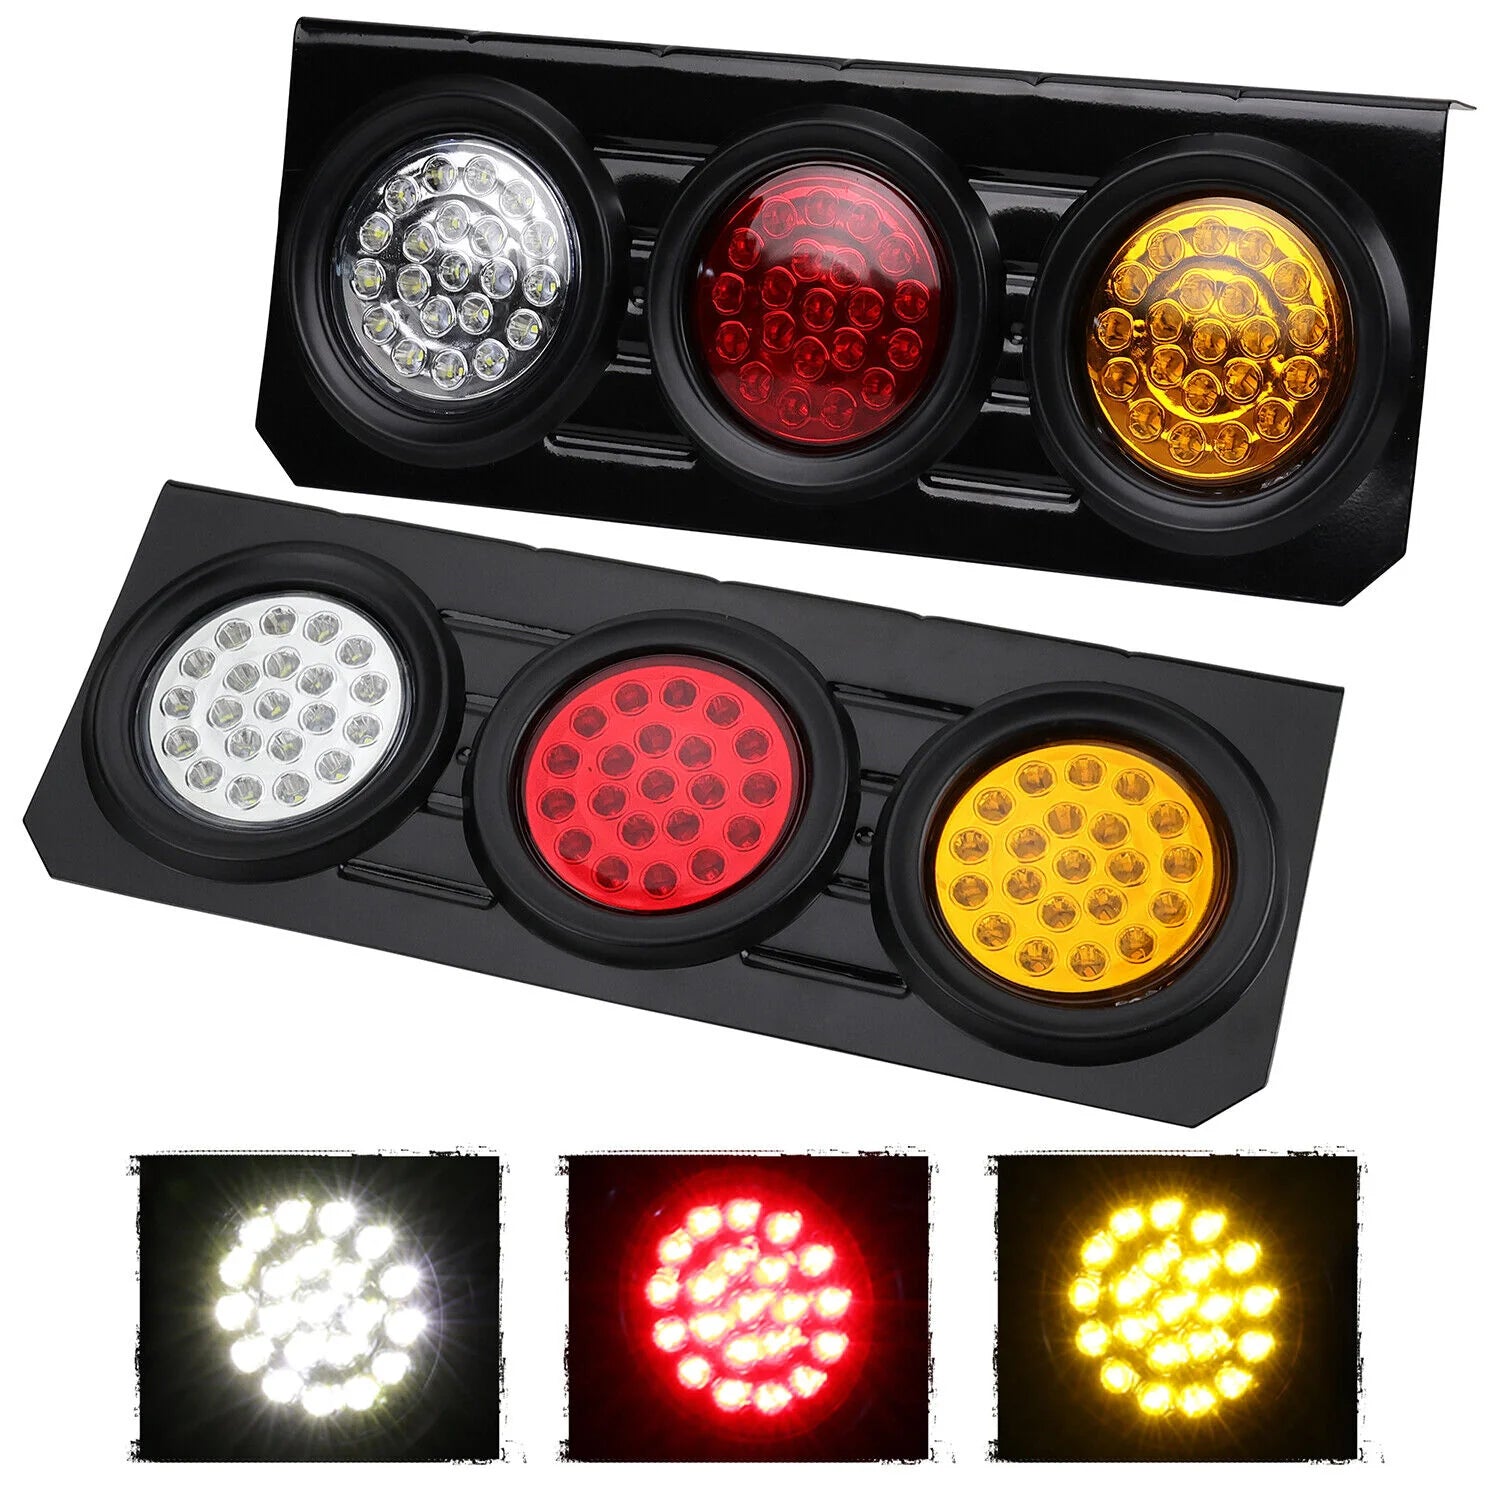 Twin Pack | Tail Lights 63 Led Truck Ute Trailer Stop Indicator Pair 12 Volt - South East Clearance Centre